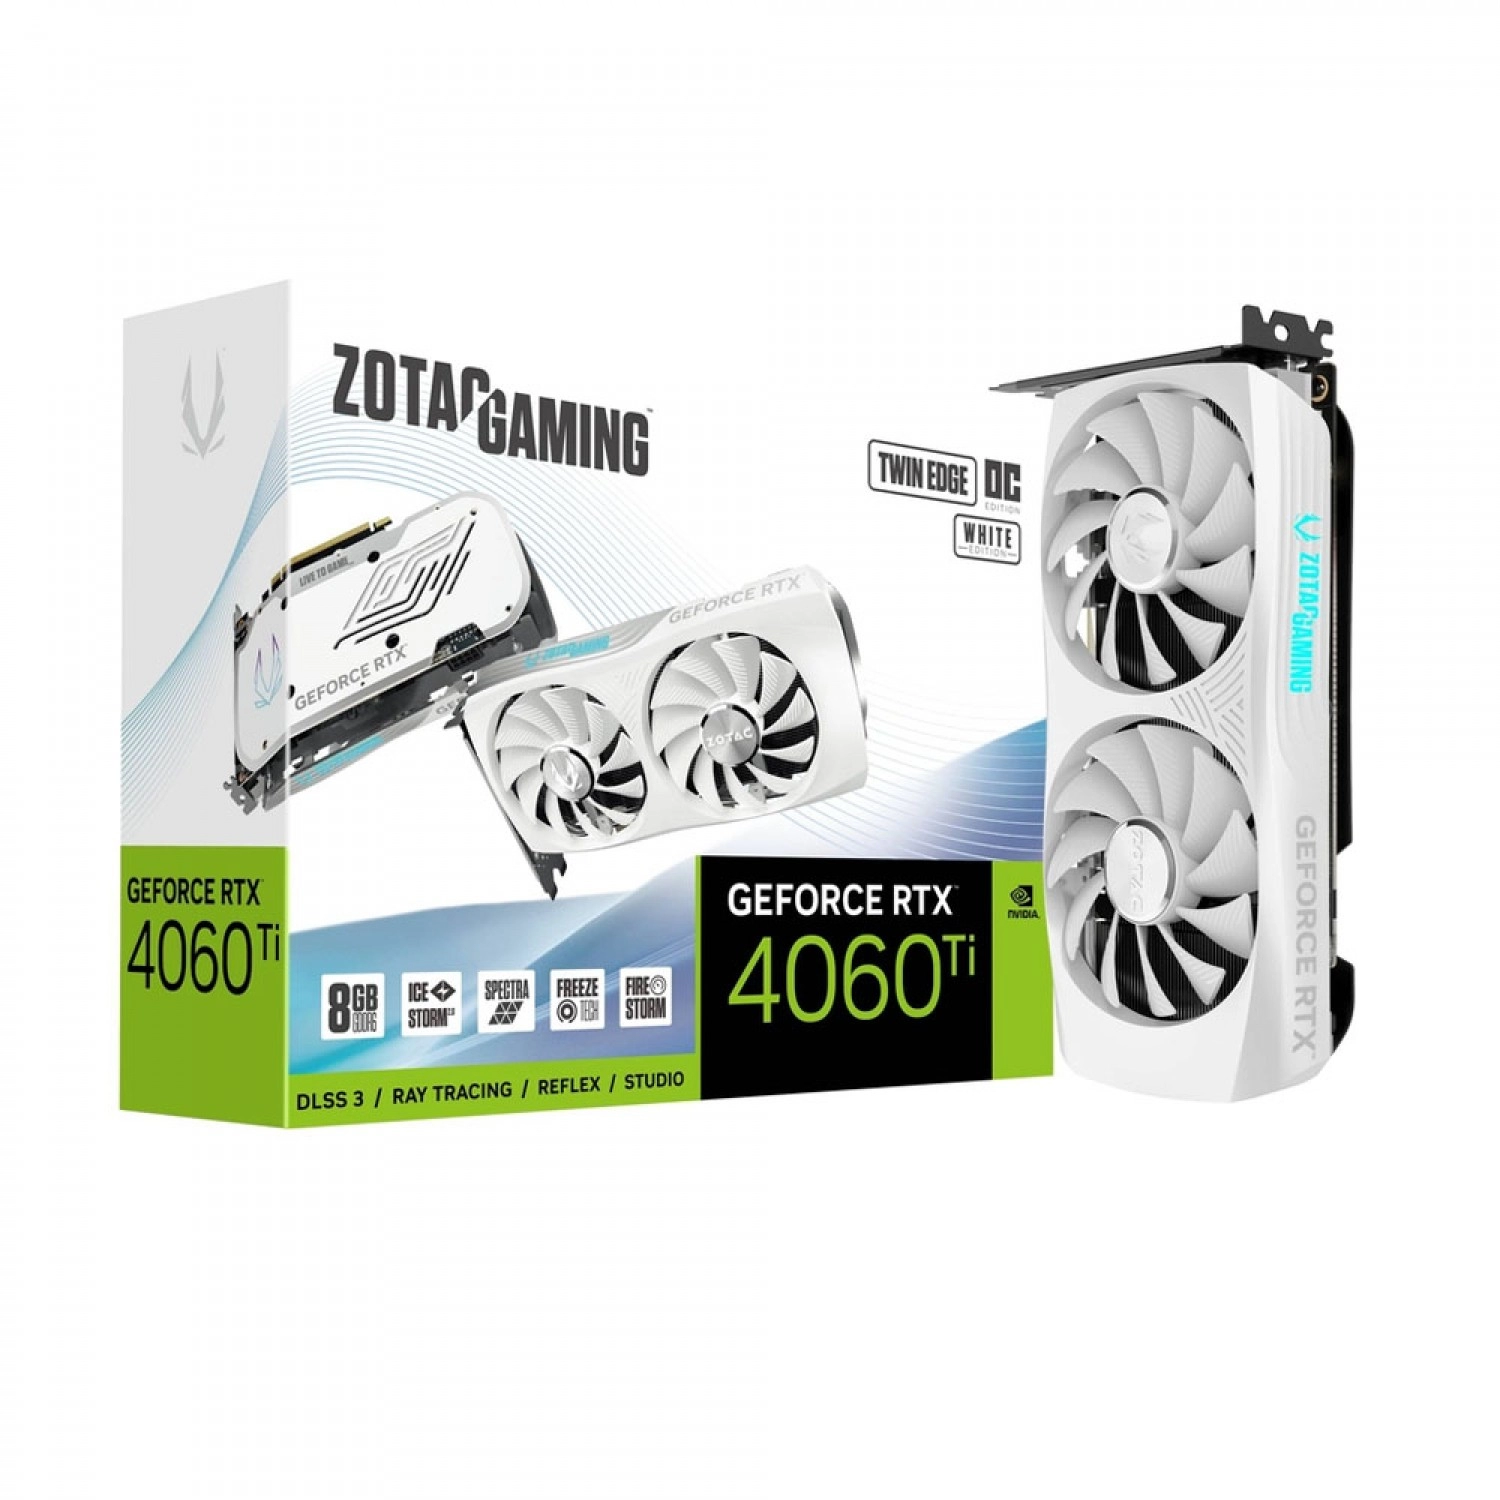 ZOTAC GAMING GeForce RTX 4060 Twin Edge OC Ti 8GB White Edition Package